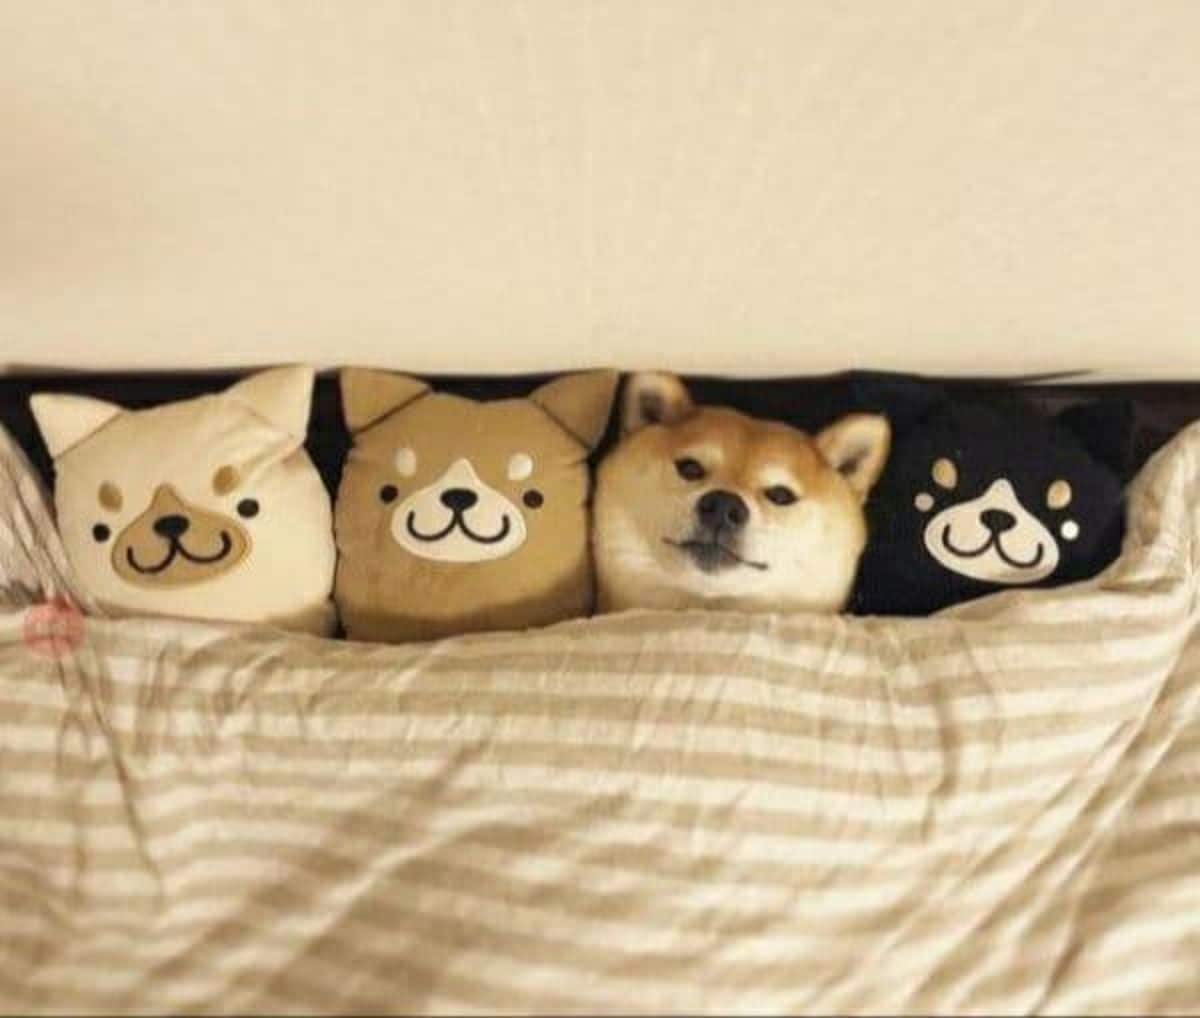 shiba inu under a blanket next to 3 stuffed toys that look like the dog